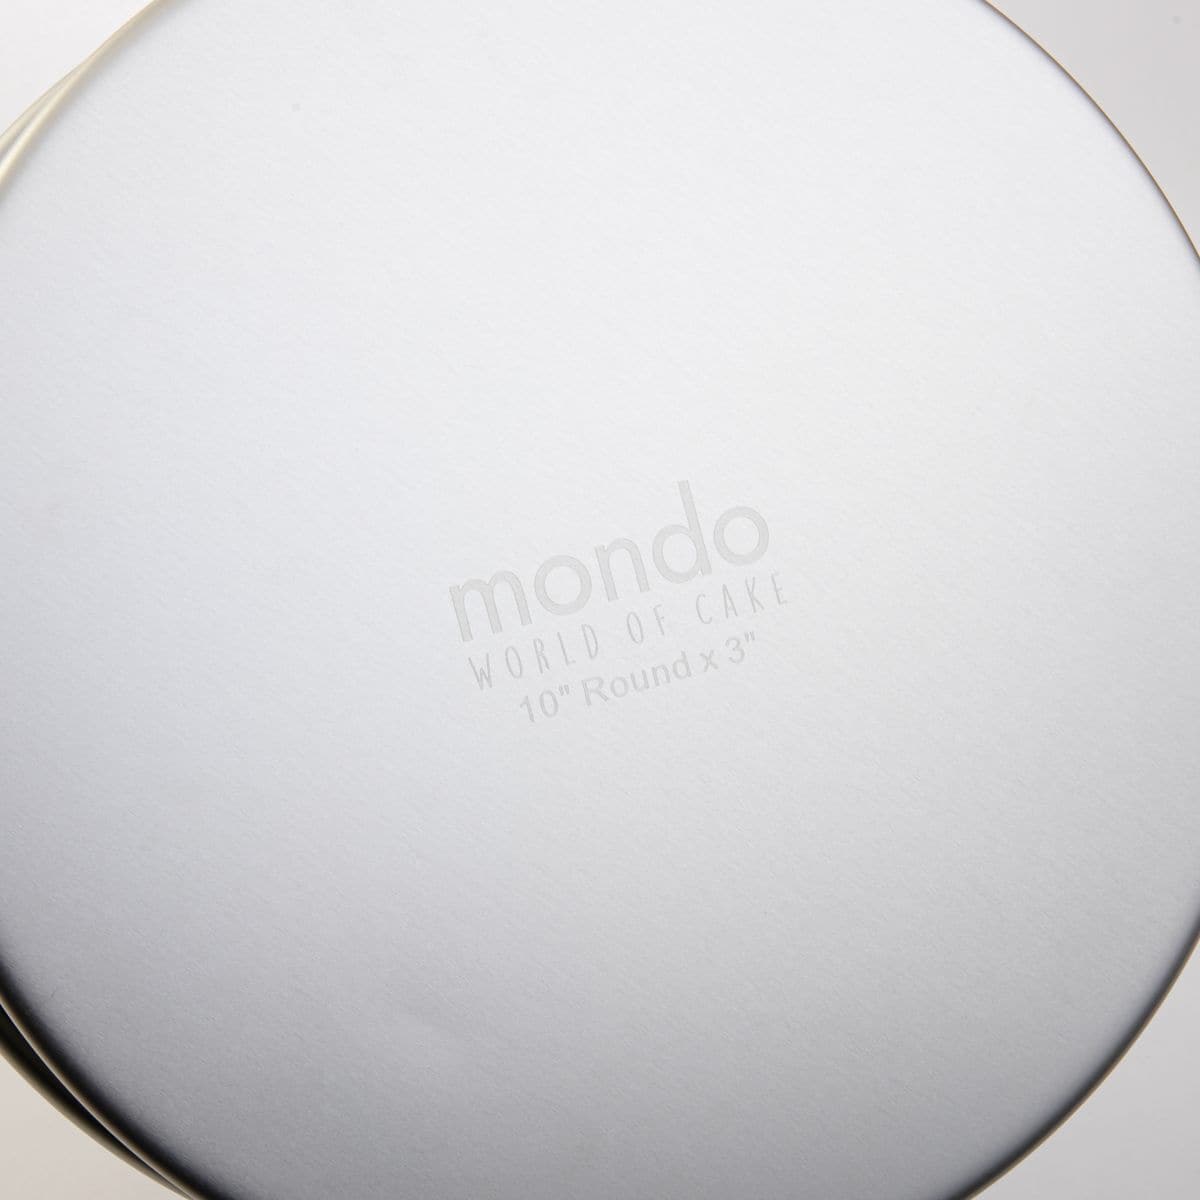 We offer the most competitive prices and Premium Mondo Pro Set Of 3 Round  4 (10Cm) Deep Cake Pans Pariss Baker on our website